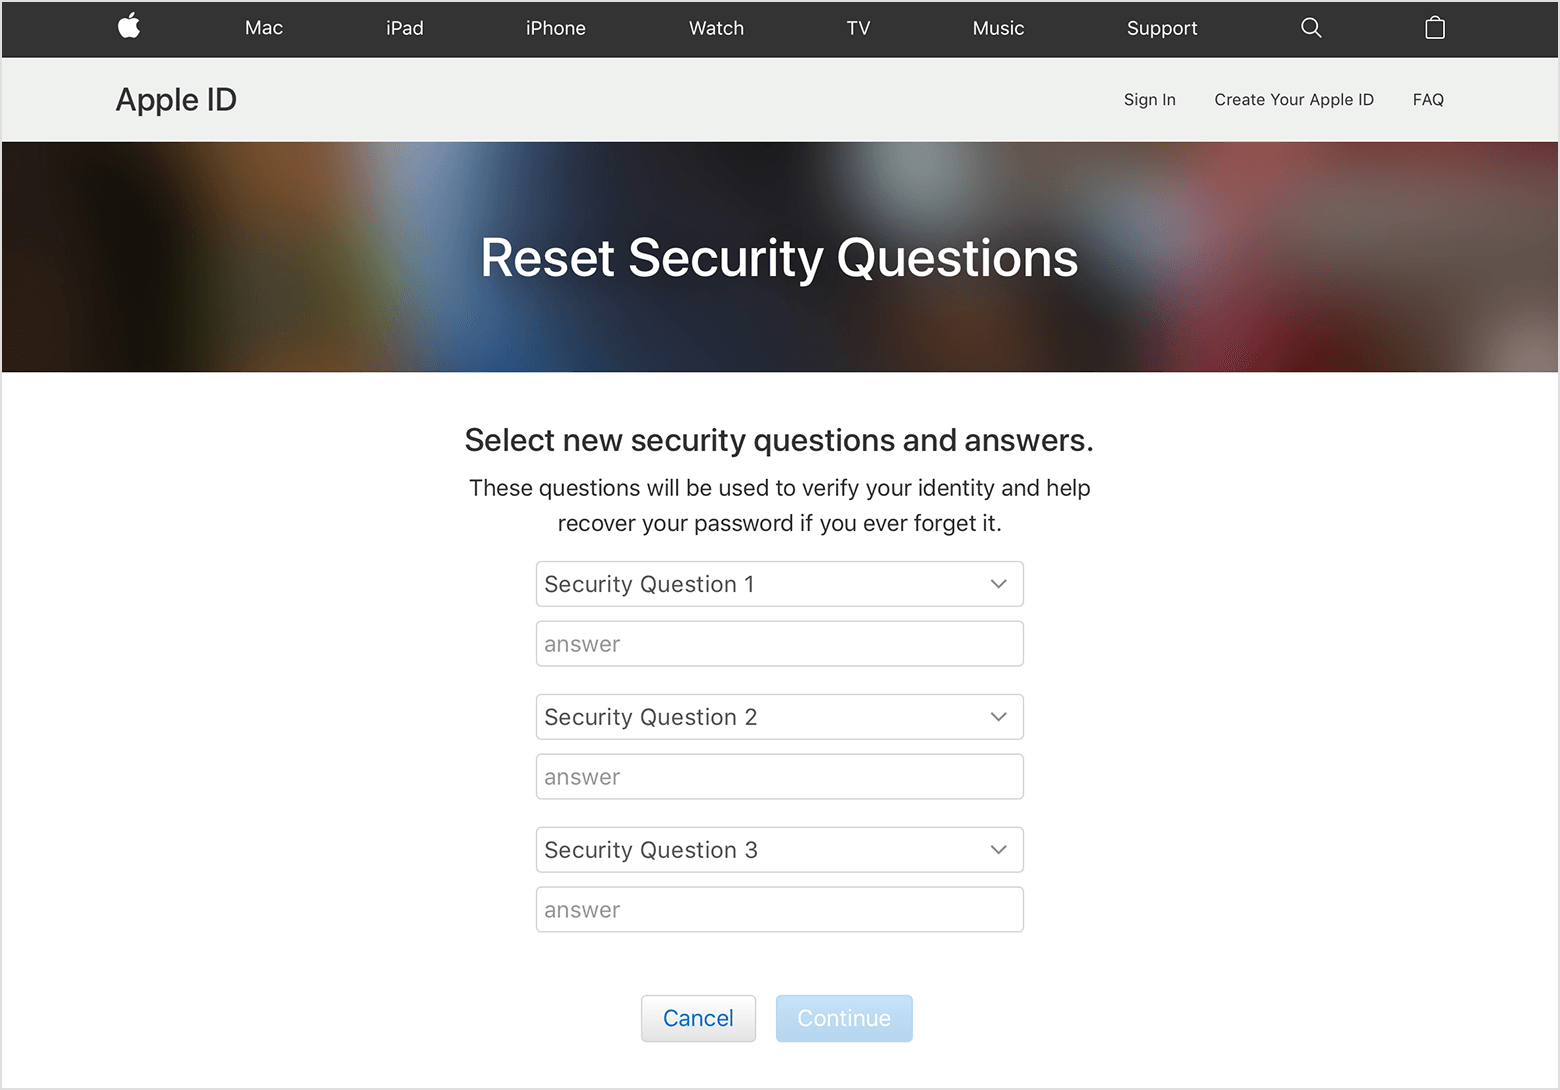 Tap on Update to save the changes. Apple cannot reset security questions